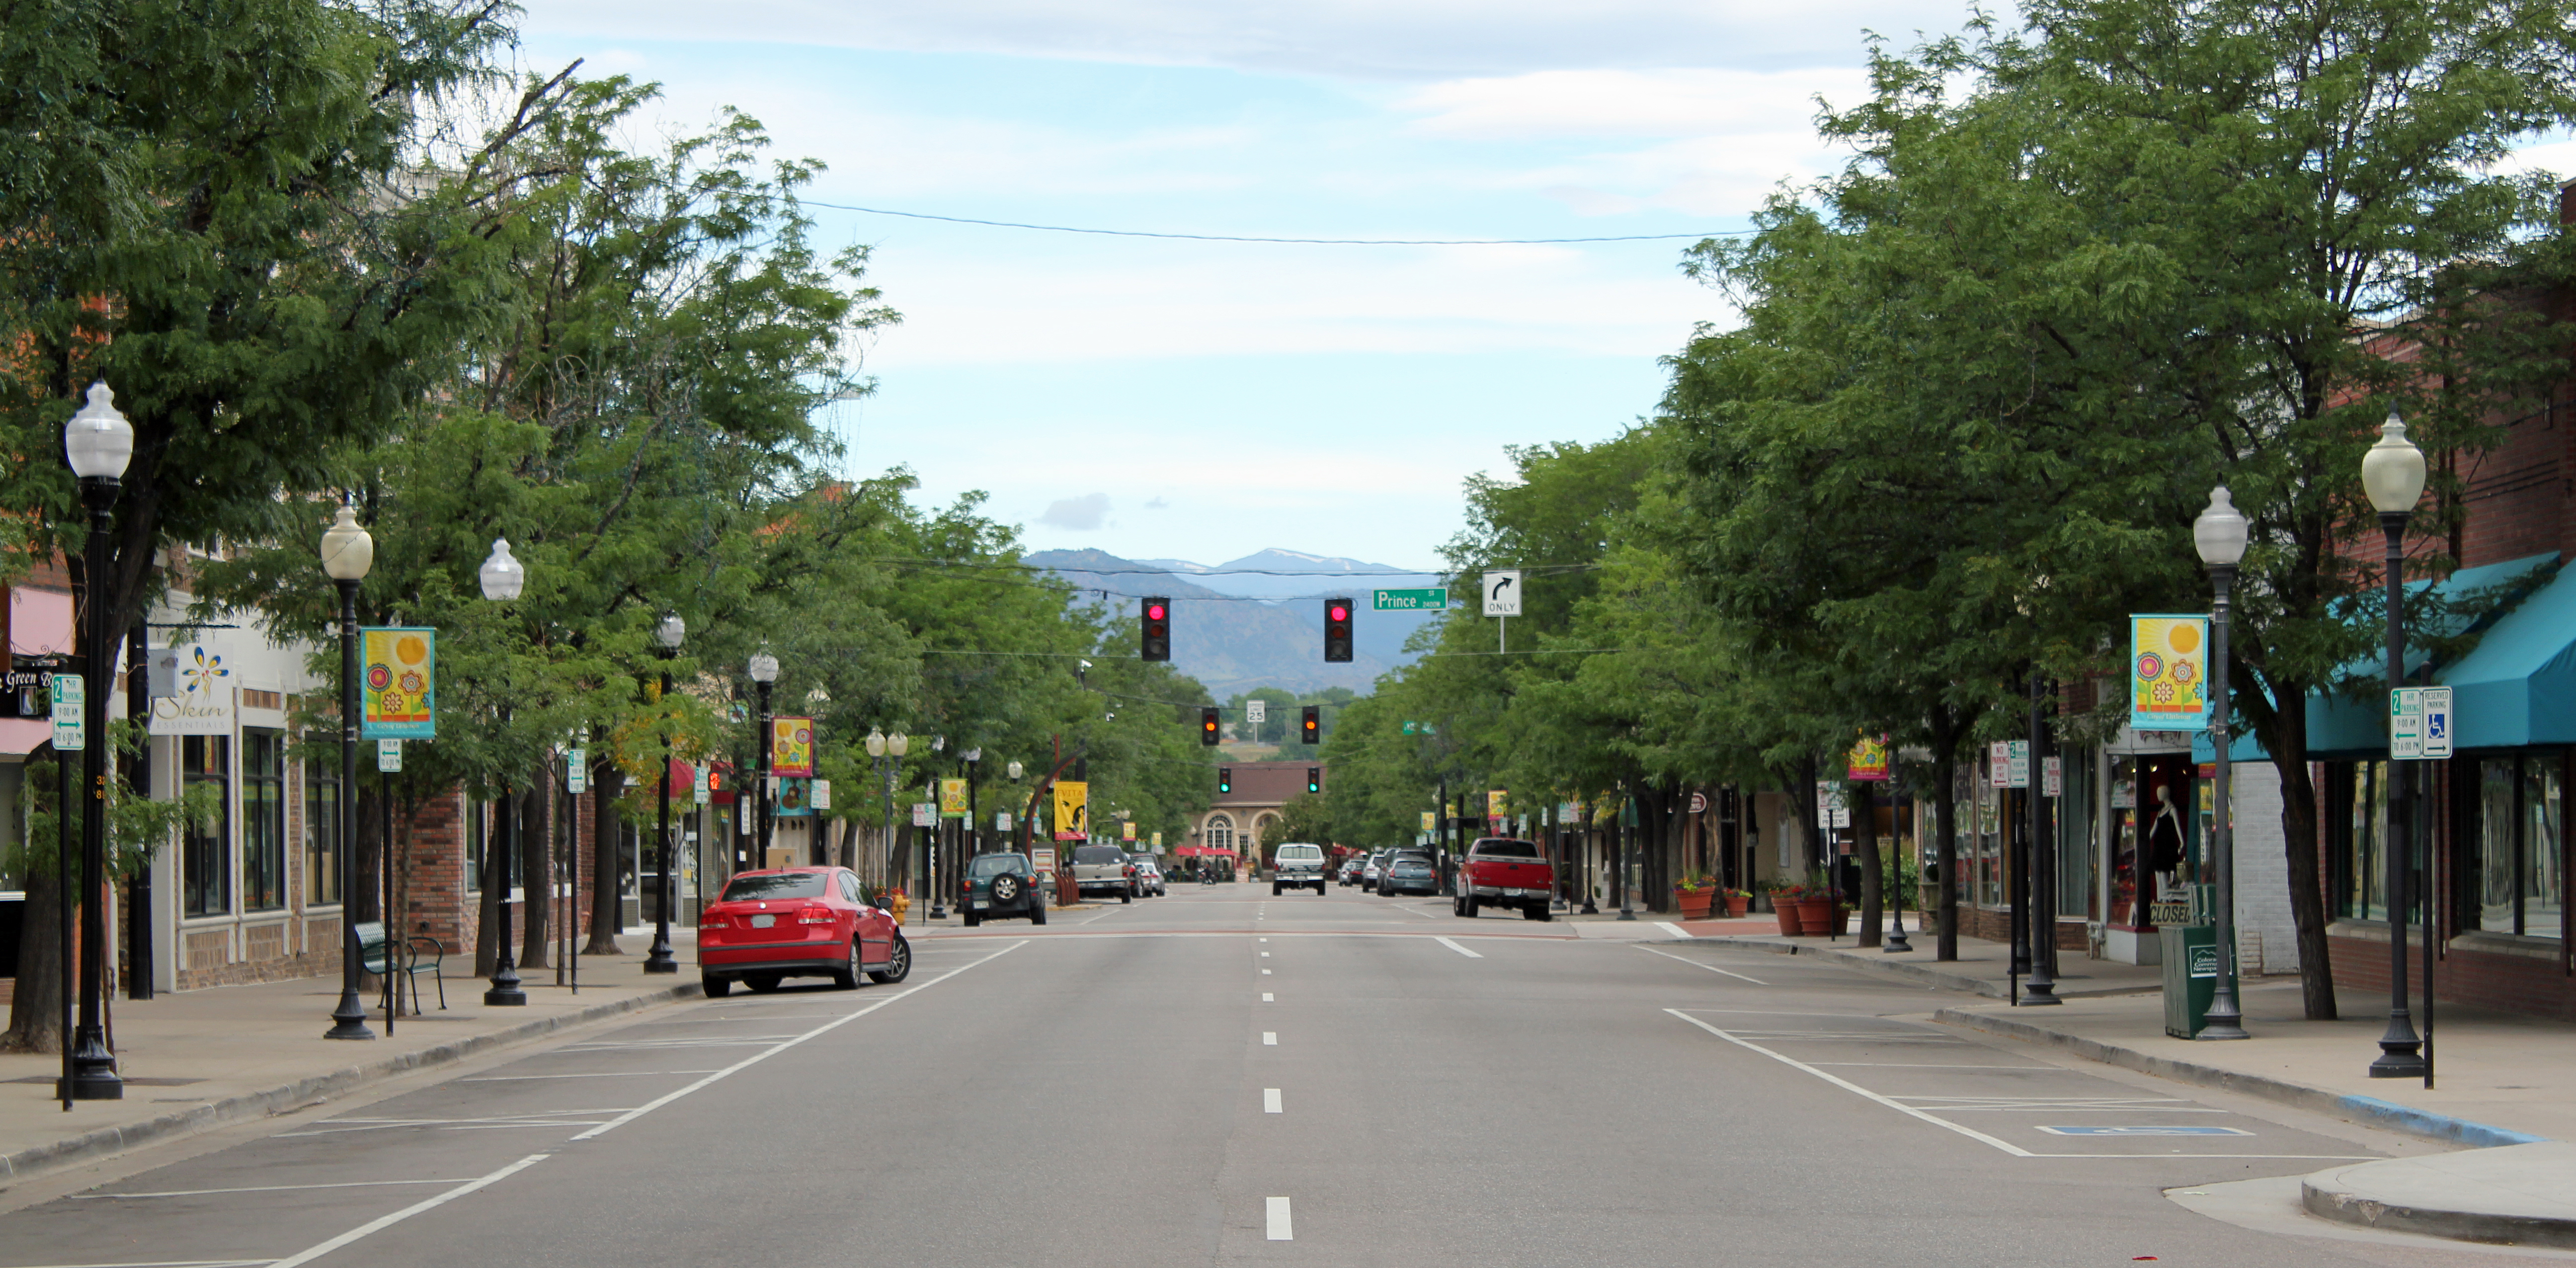 A section of Main Street in Littleton, Colorado.